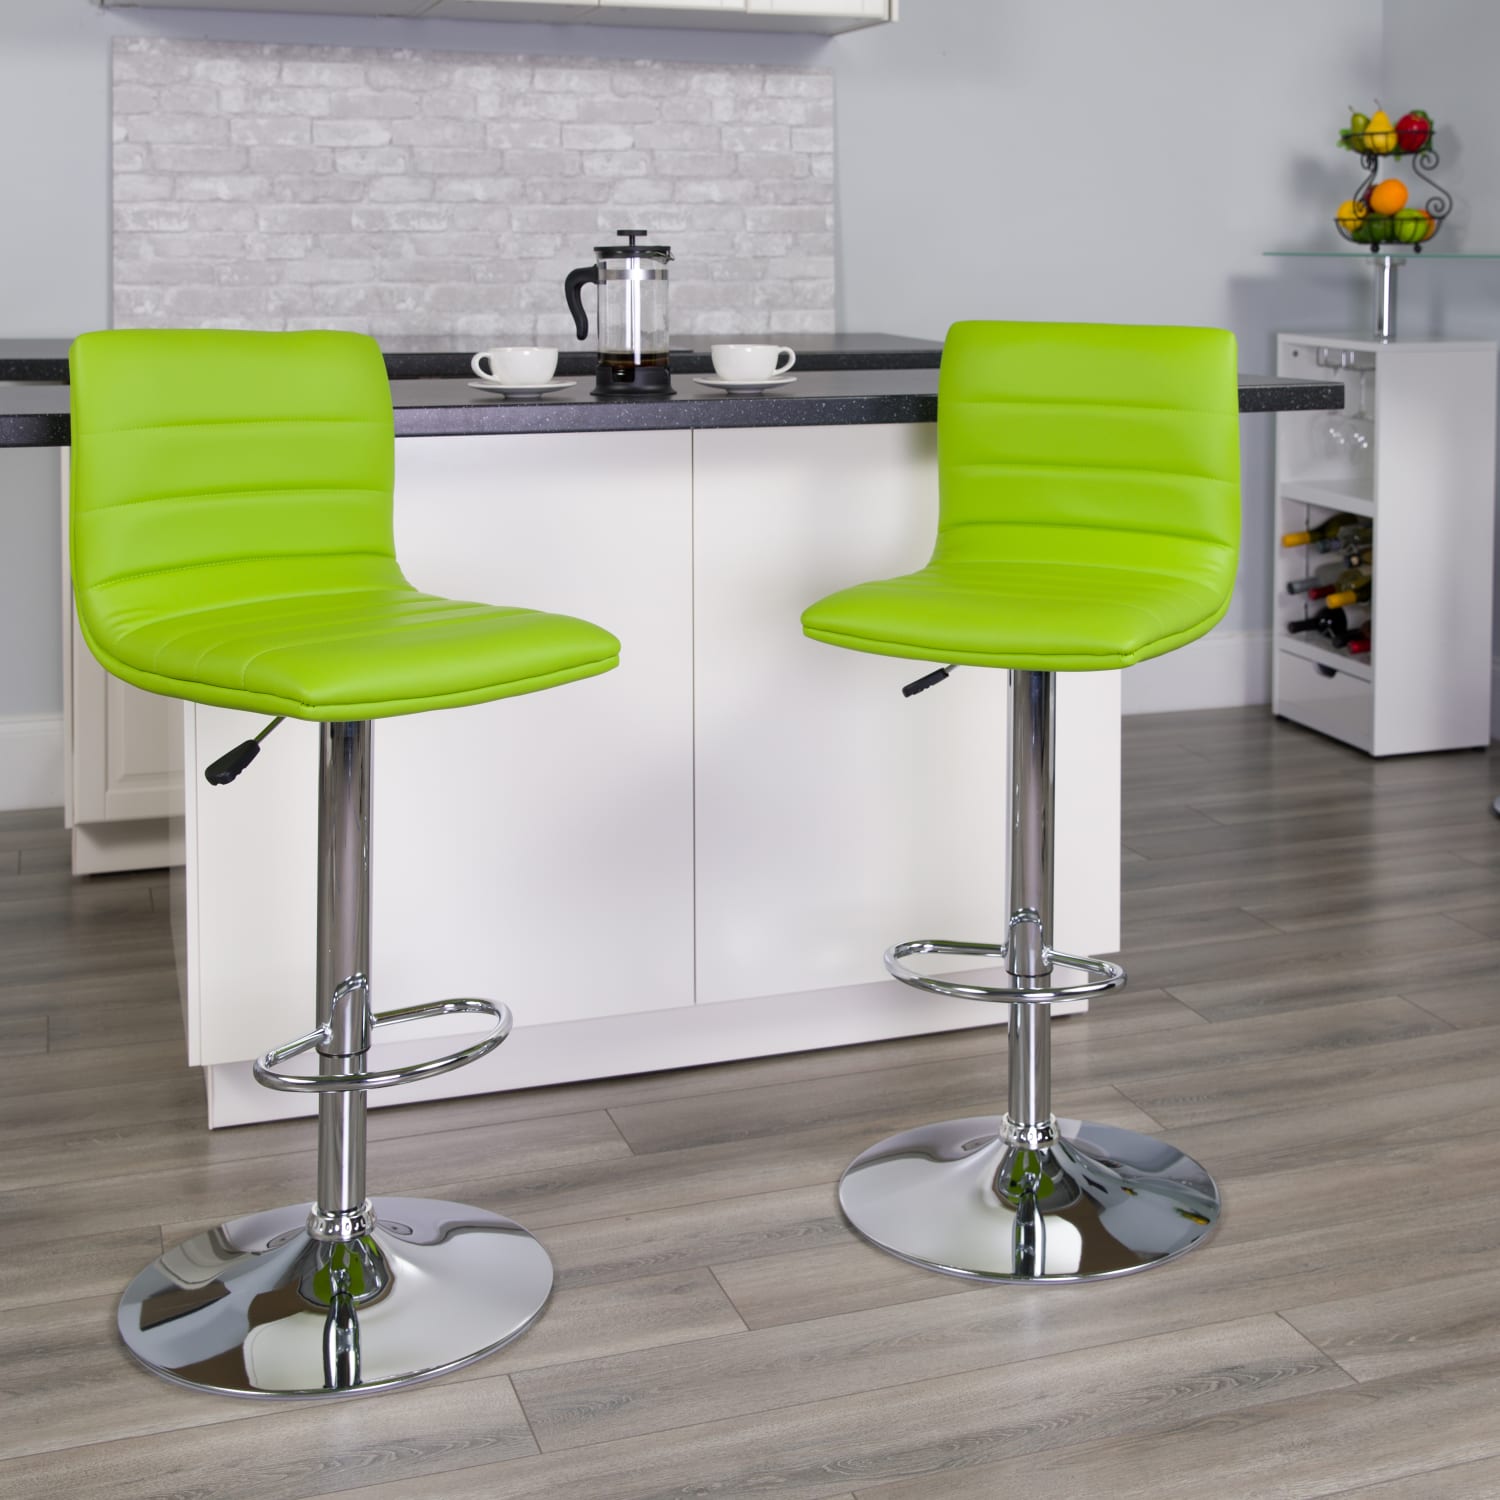 2 Pack Modern Green Vinyl Adjustable Bar Stool with Back, Counter Height Swivel Stool with Chrome Pedestal Base